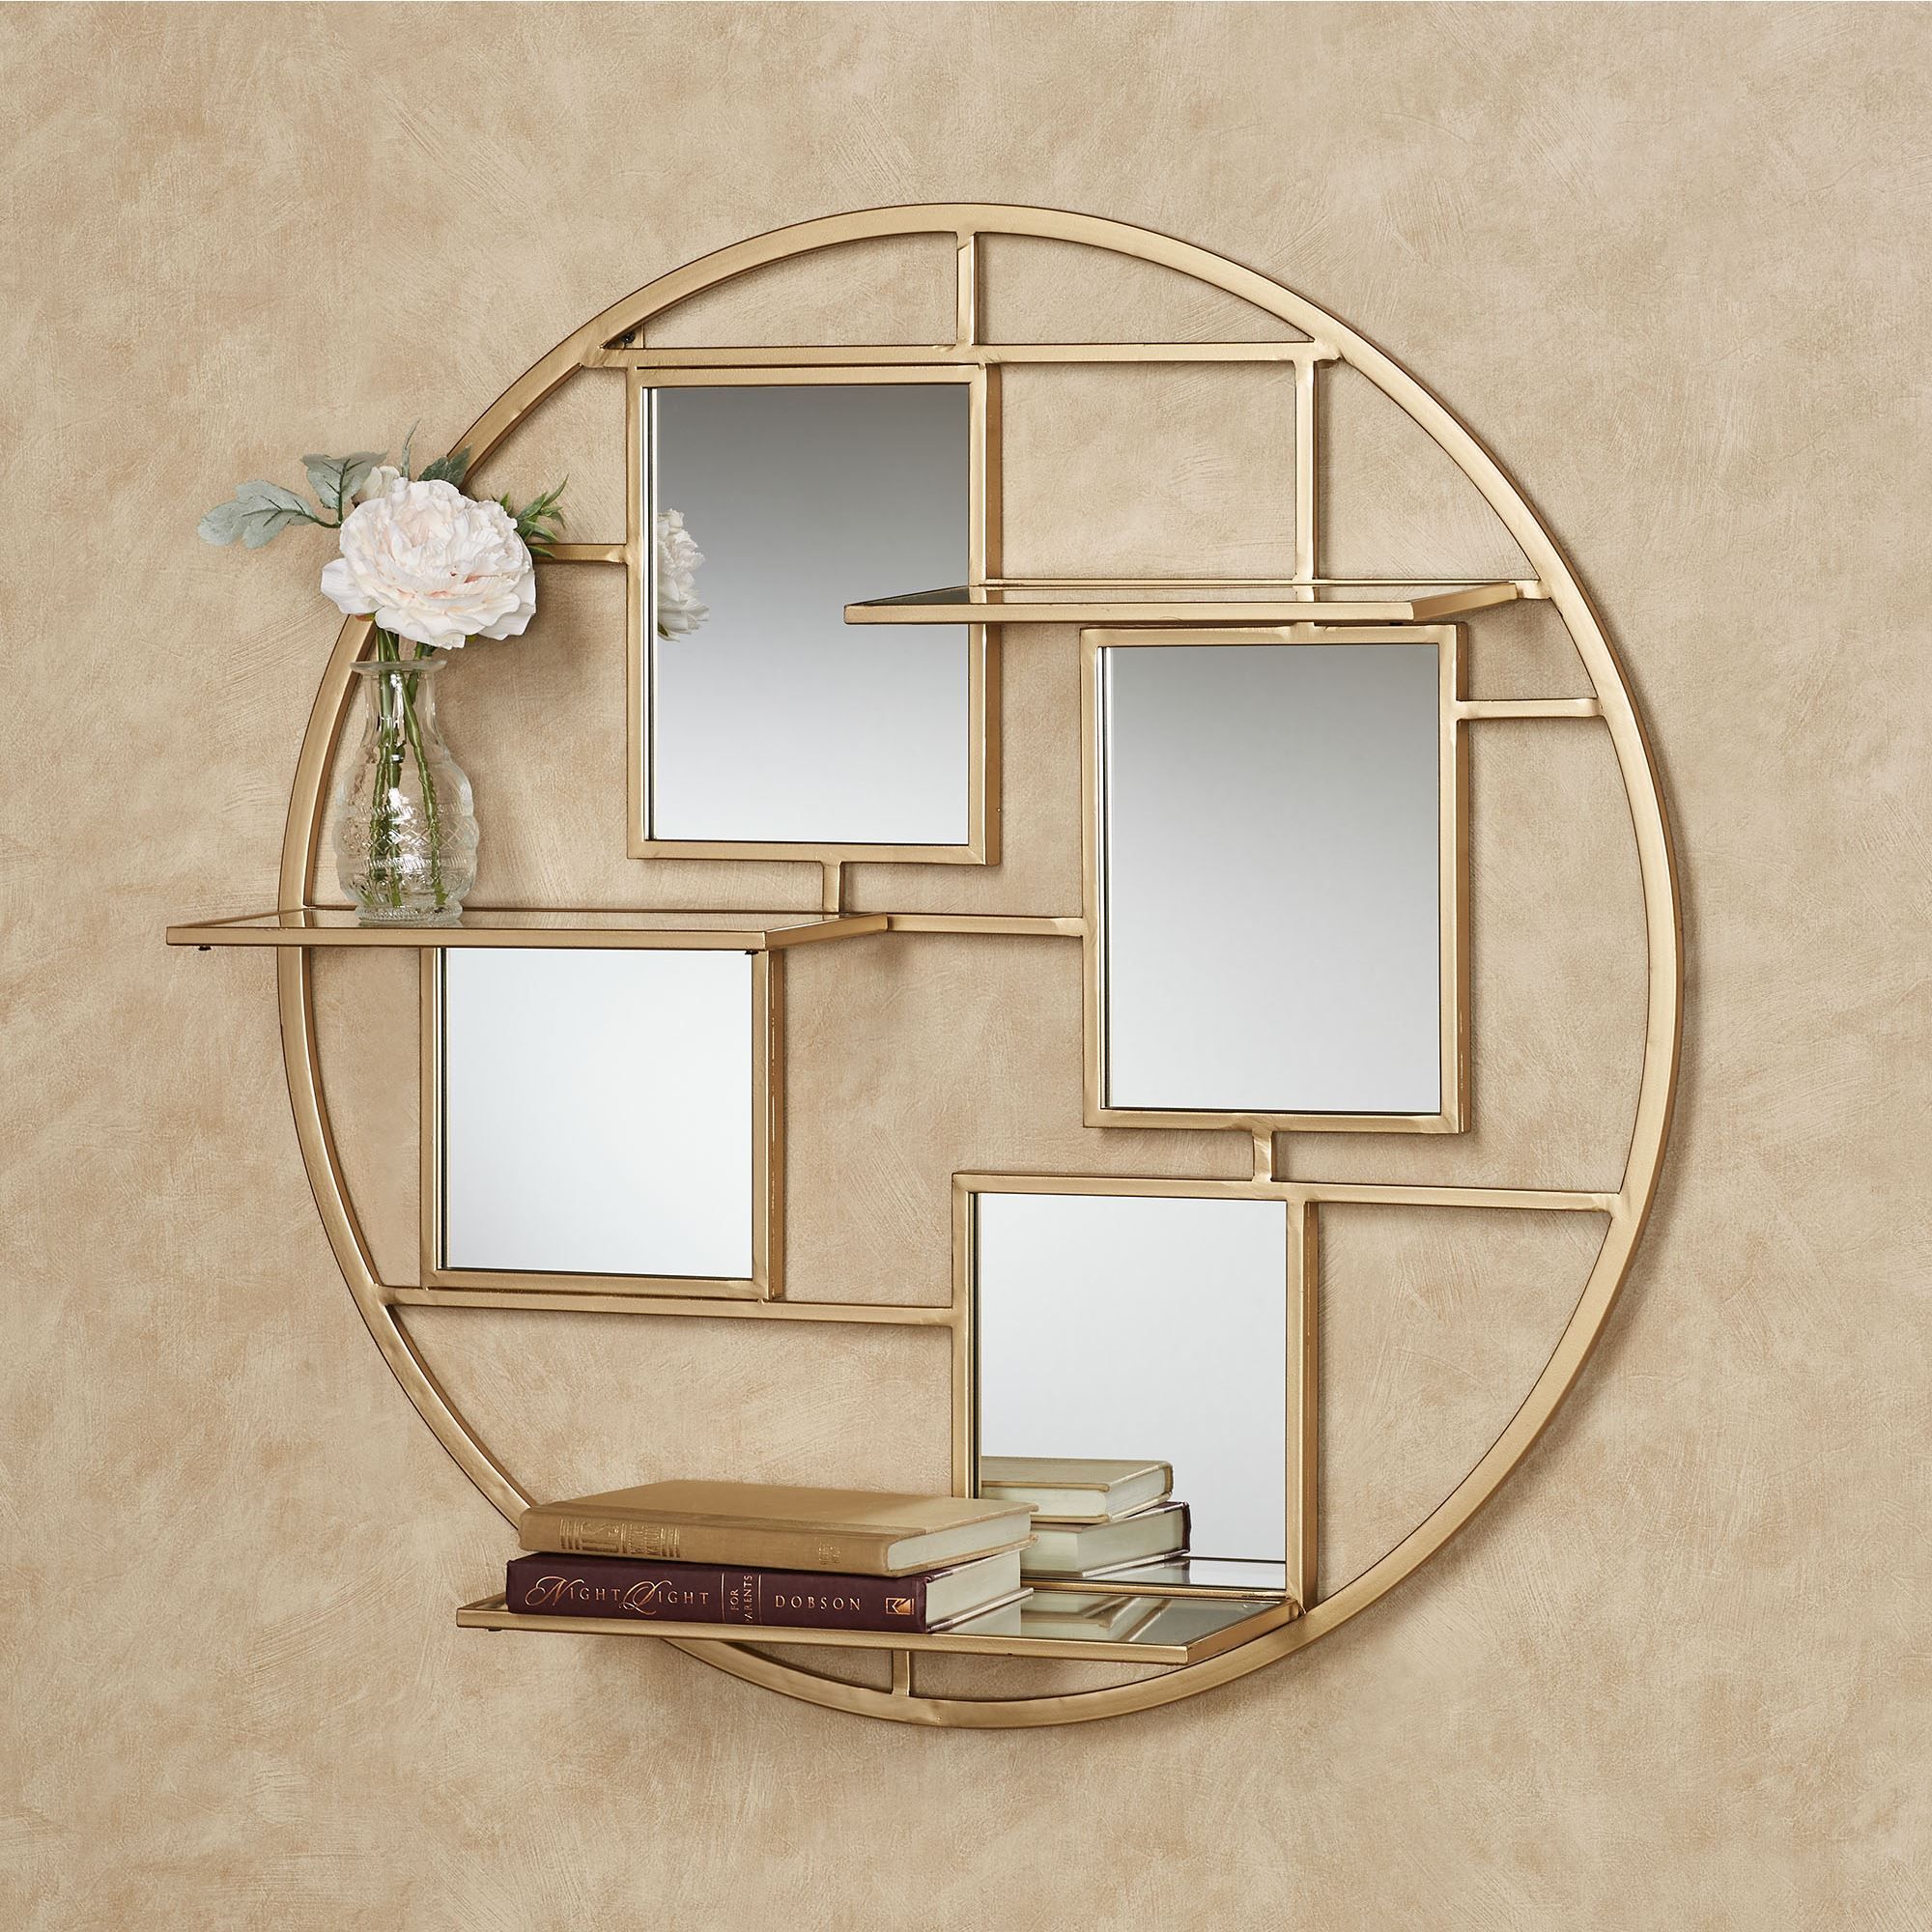 Brioni Gold Metal Mirrored Wall Art Shelf Intended For Gold Fan Metal Wall Art (View 13 of 15)